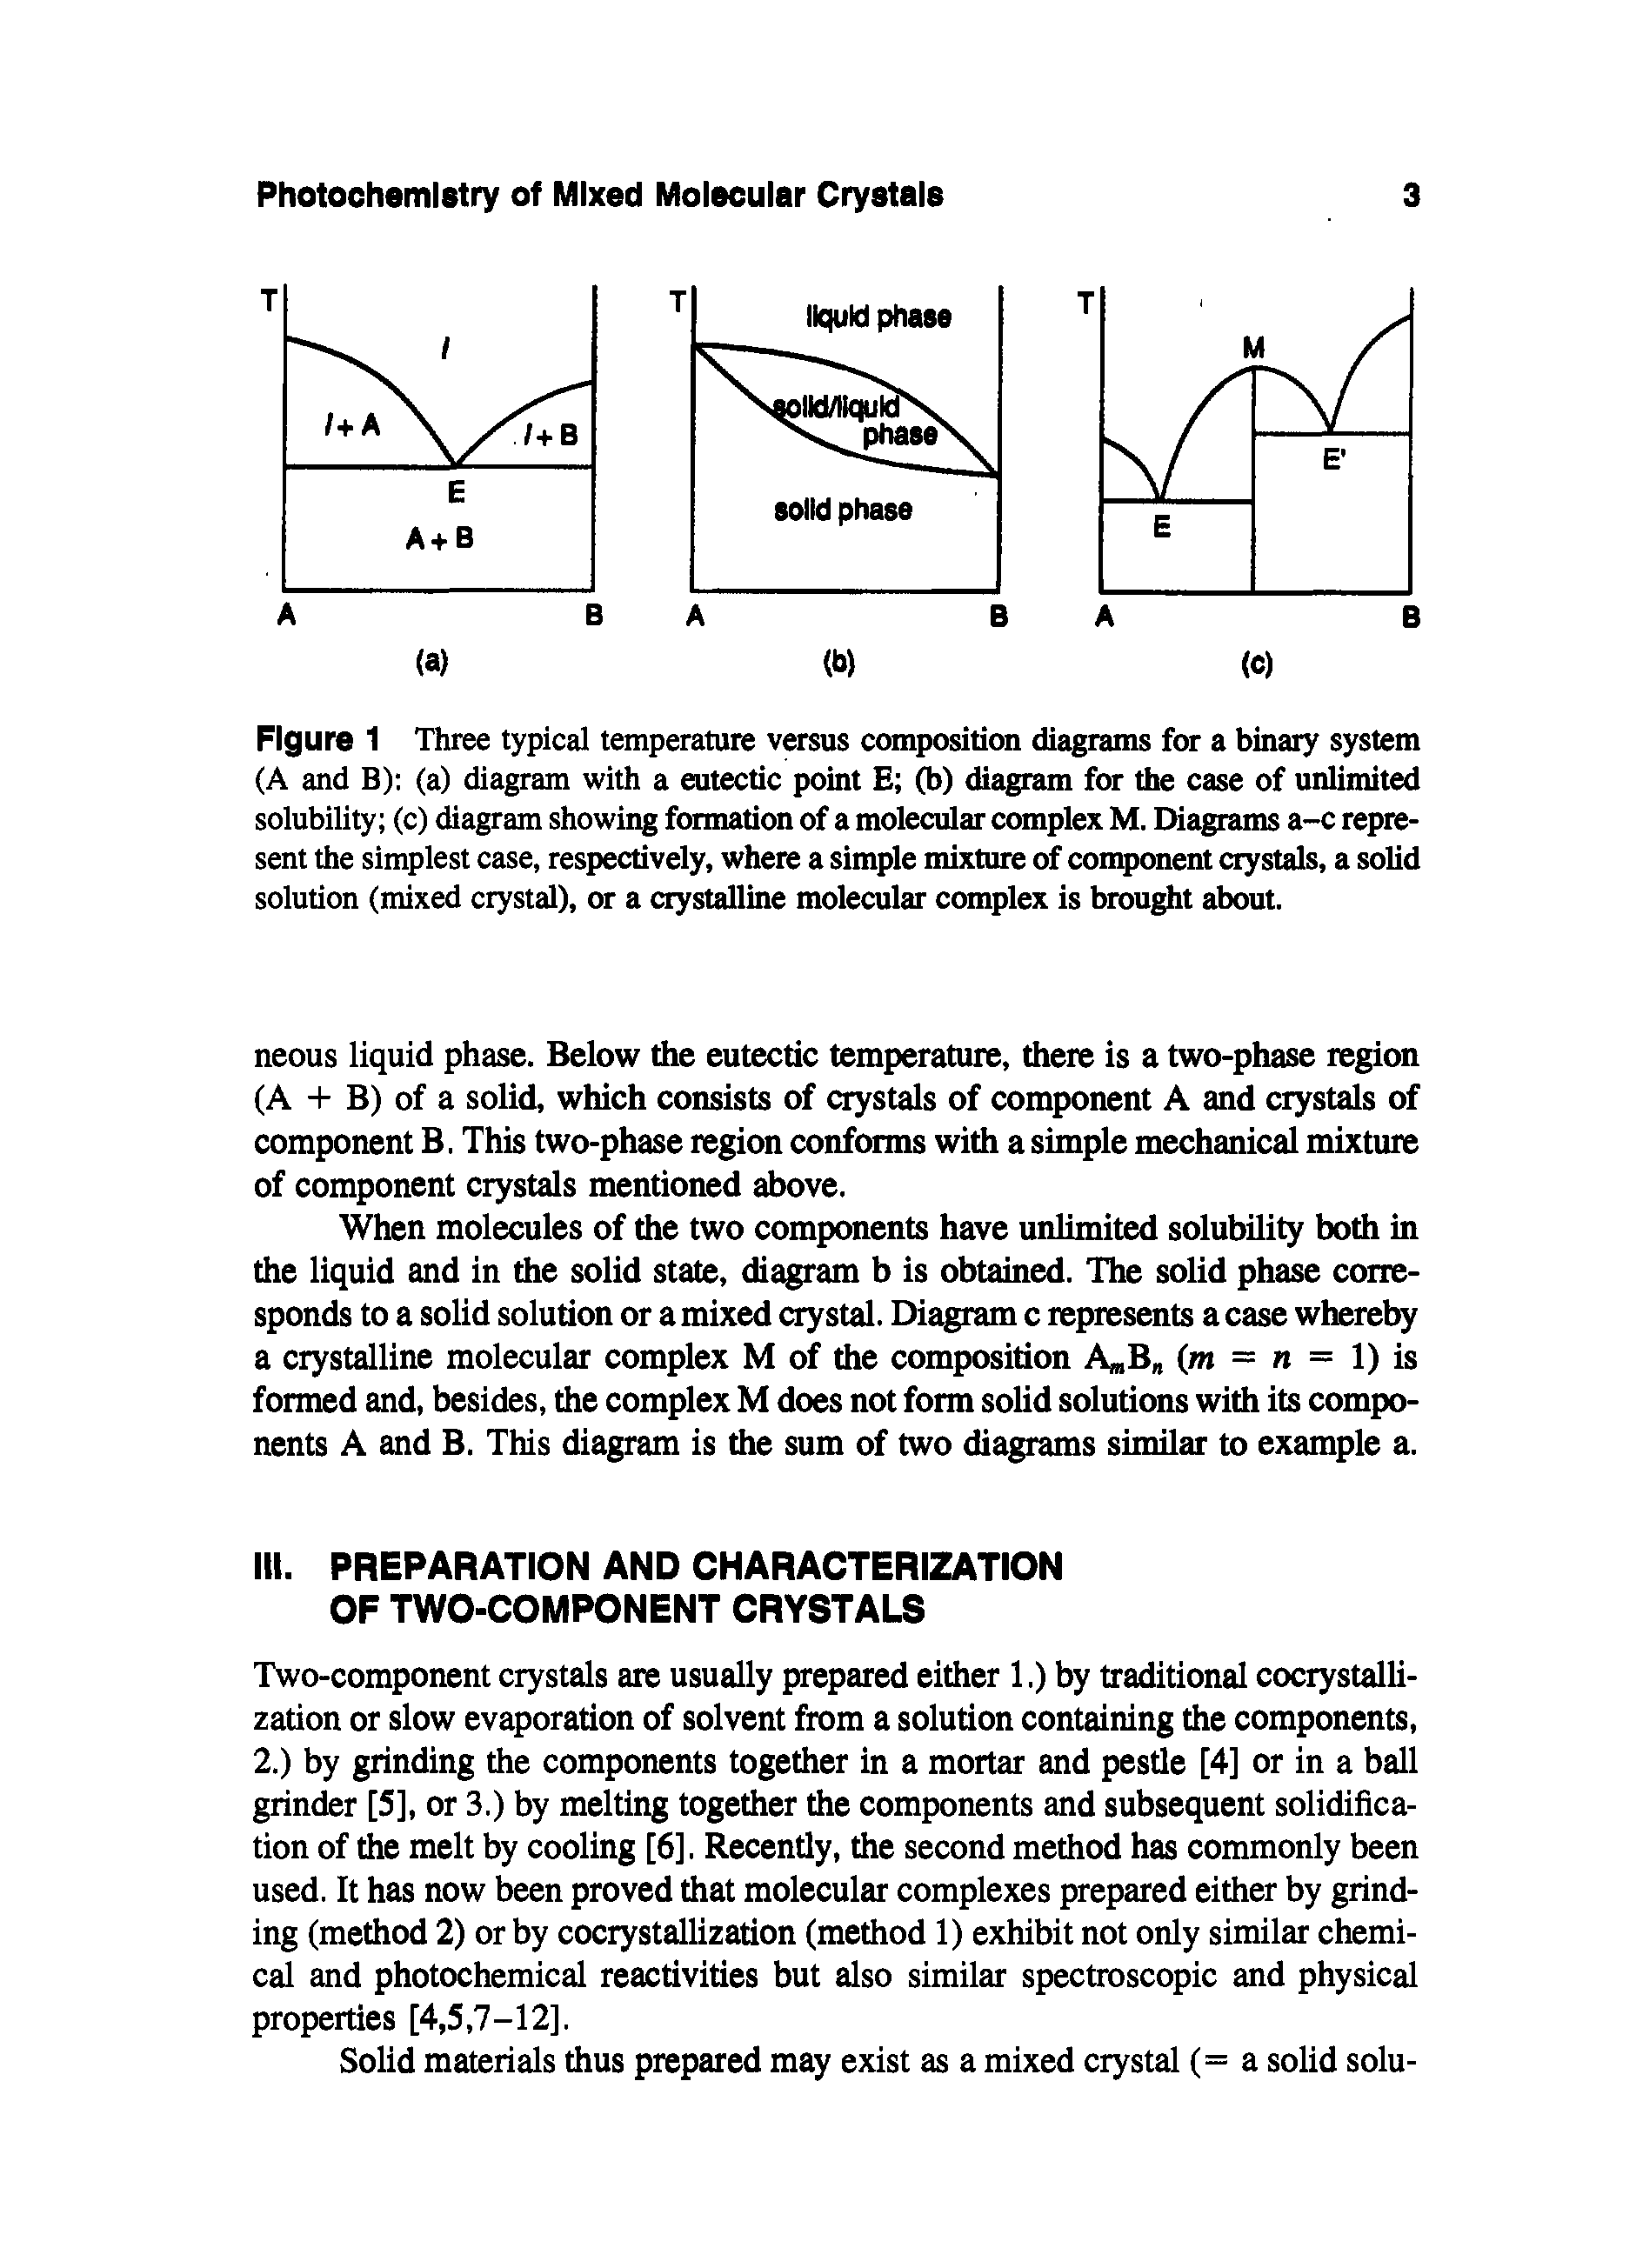 Figure 1 Three typical temperature versus composition diagrams for a binary system (A and B) (a) diagram with a eutectic point E (b) diagram for the case of unlimited solubility (c) diagram showing formation of a molecular complex M. Diagrams a-c represent the simplest case, respectively, where a simple mixture of component crystals, a solid solution (mixed crystal), or a crystalline molecular complex is brought about.